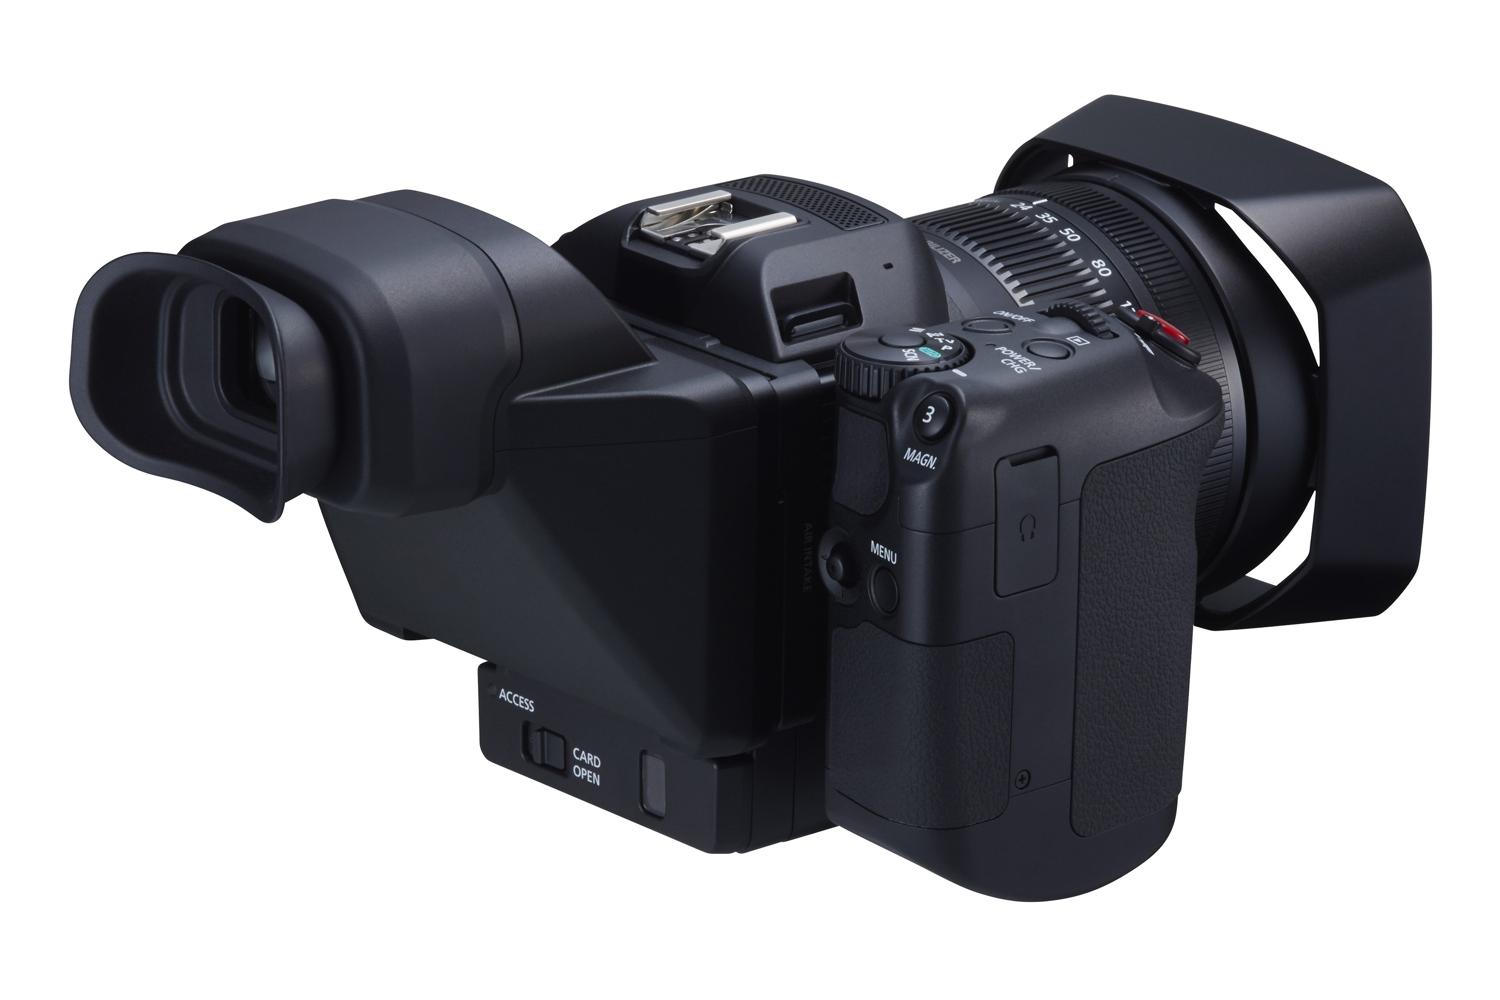 canons new affordable 4k camcorder ideal for budding filmmakers youtube creators canon xc10 3